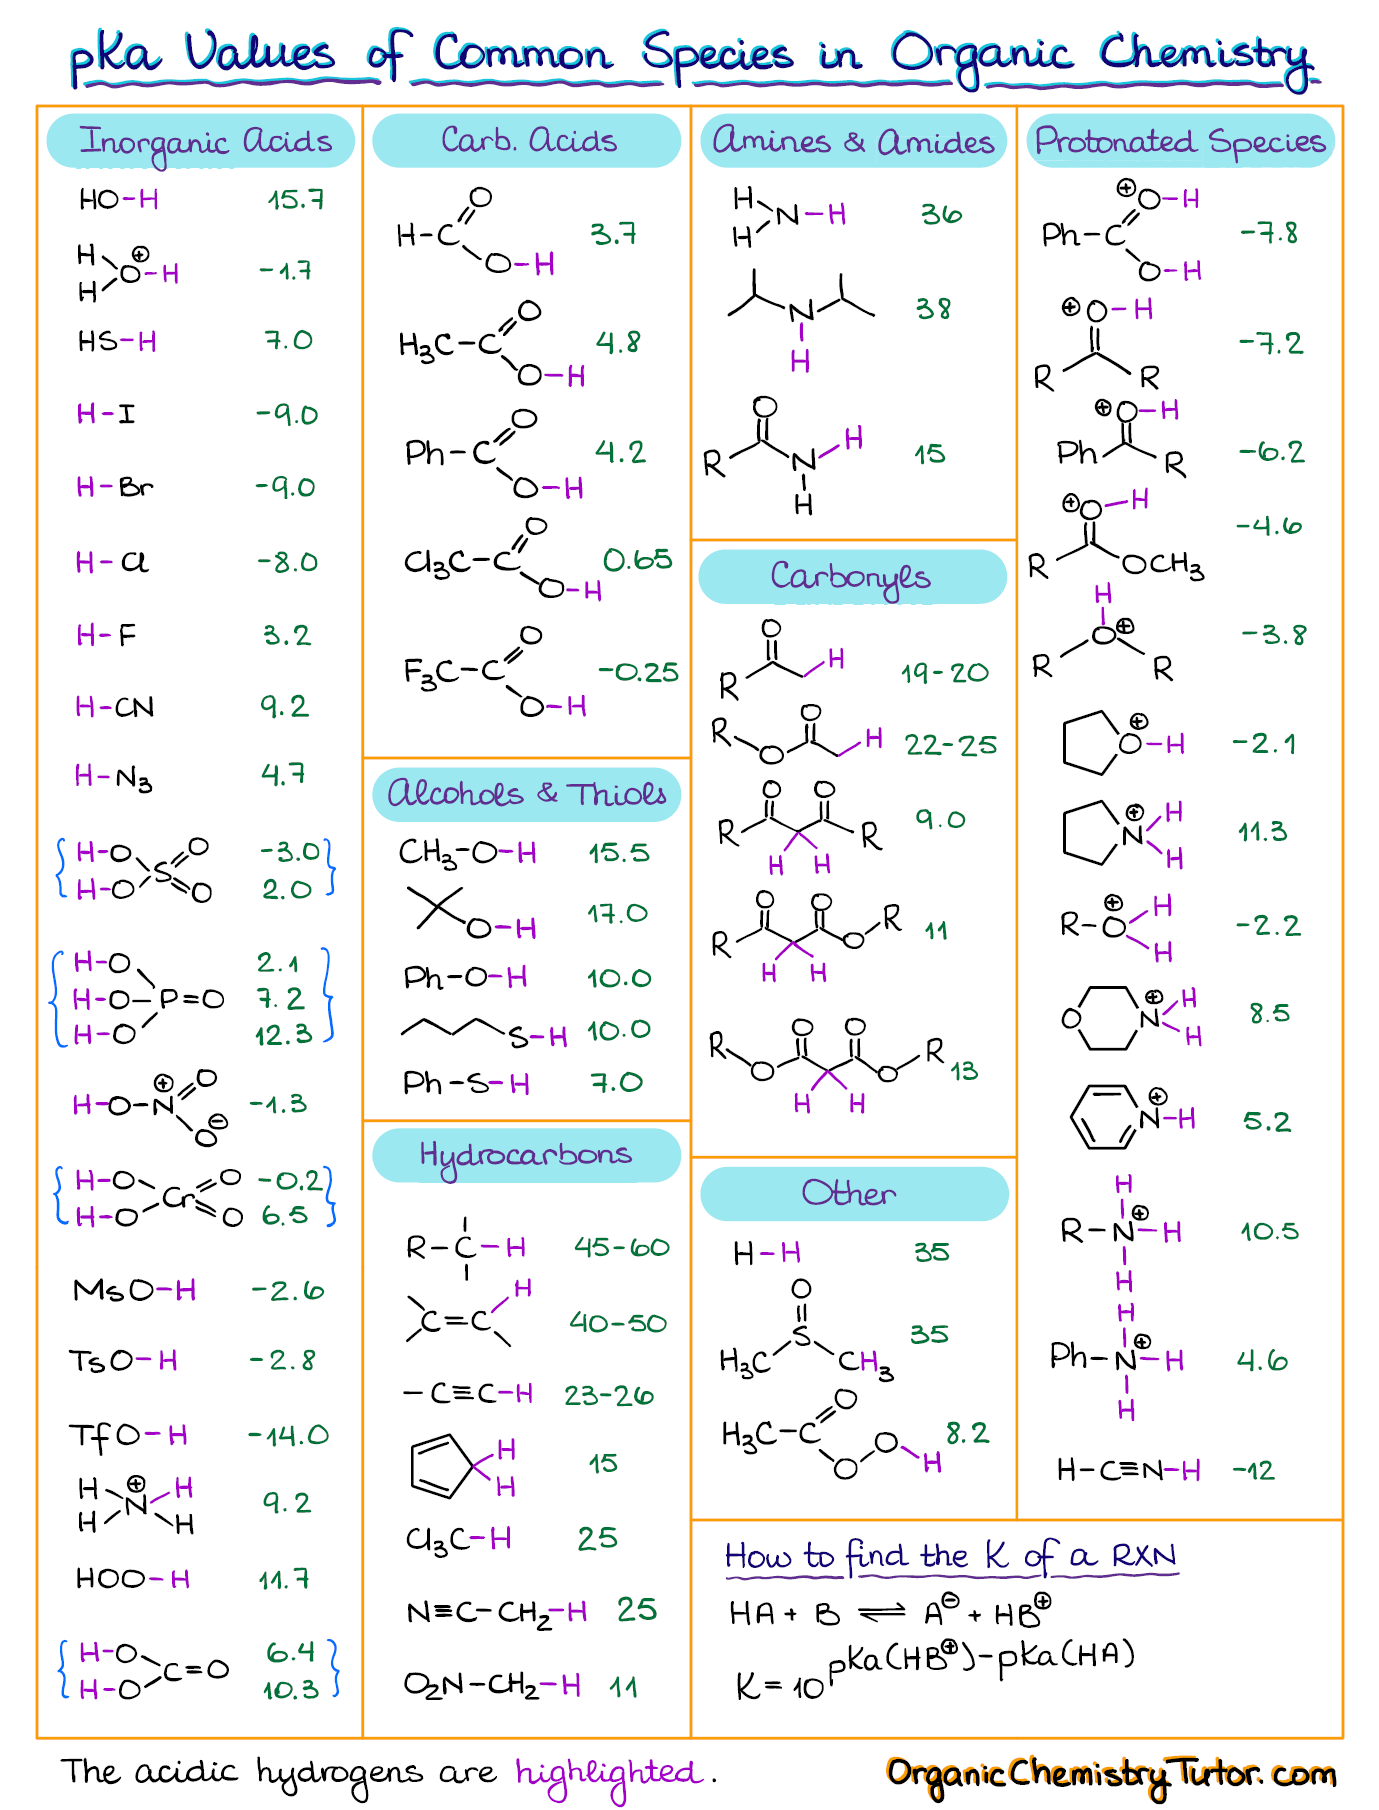 acidity and basicity of organic compounds